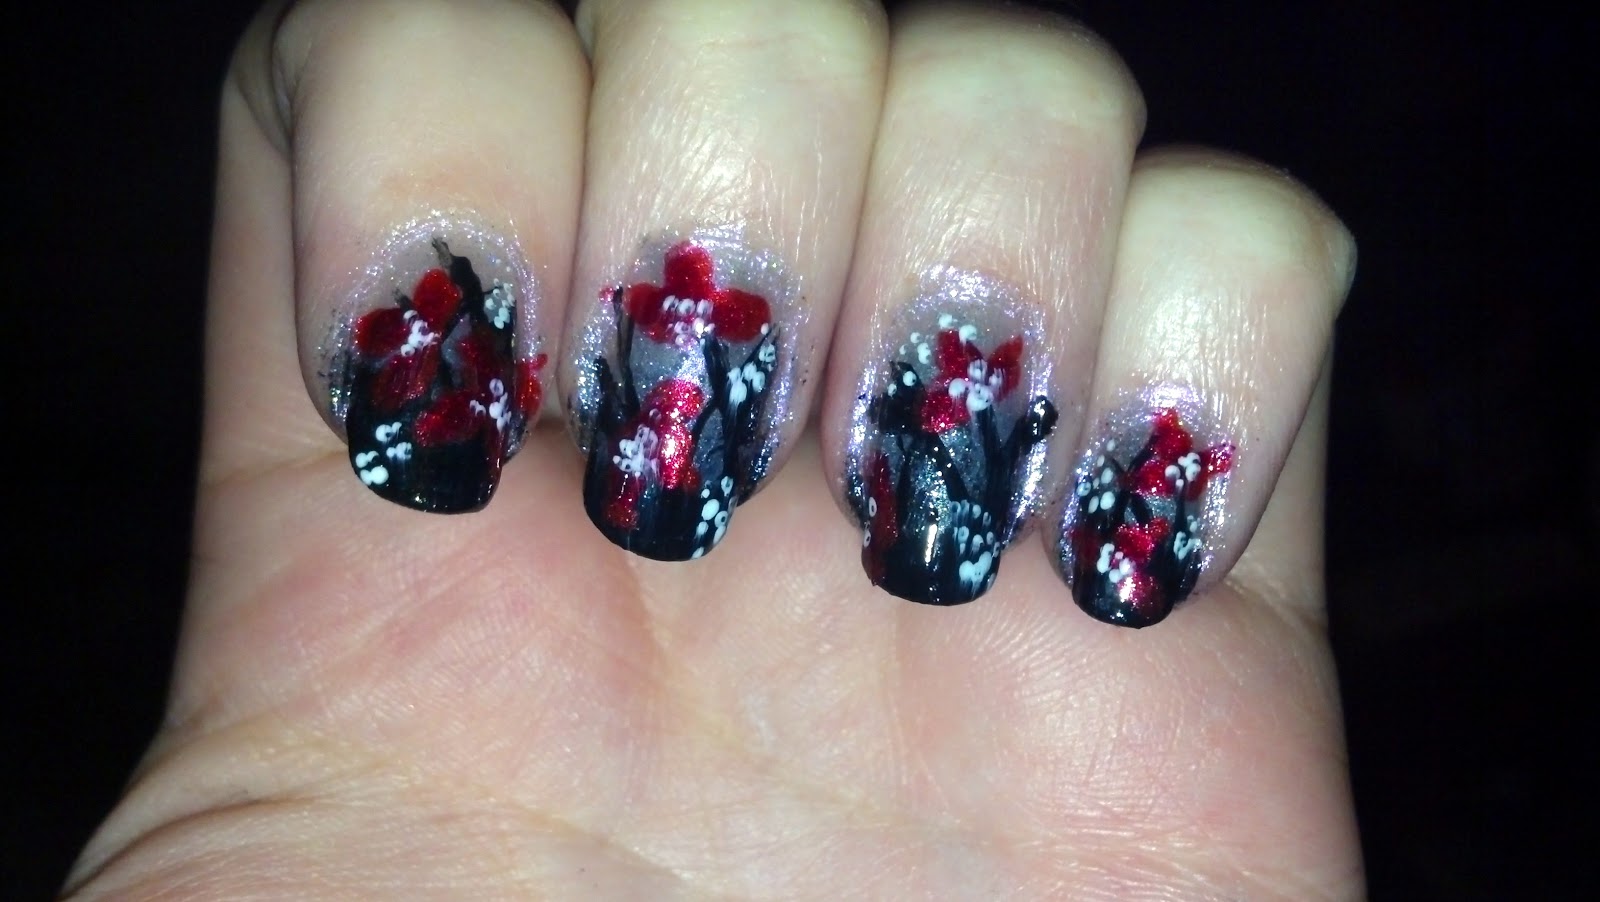 The Nail Diaries: Gothic Flowers